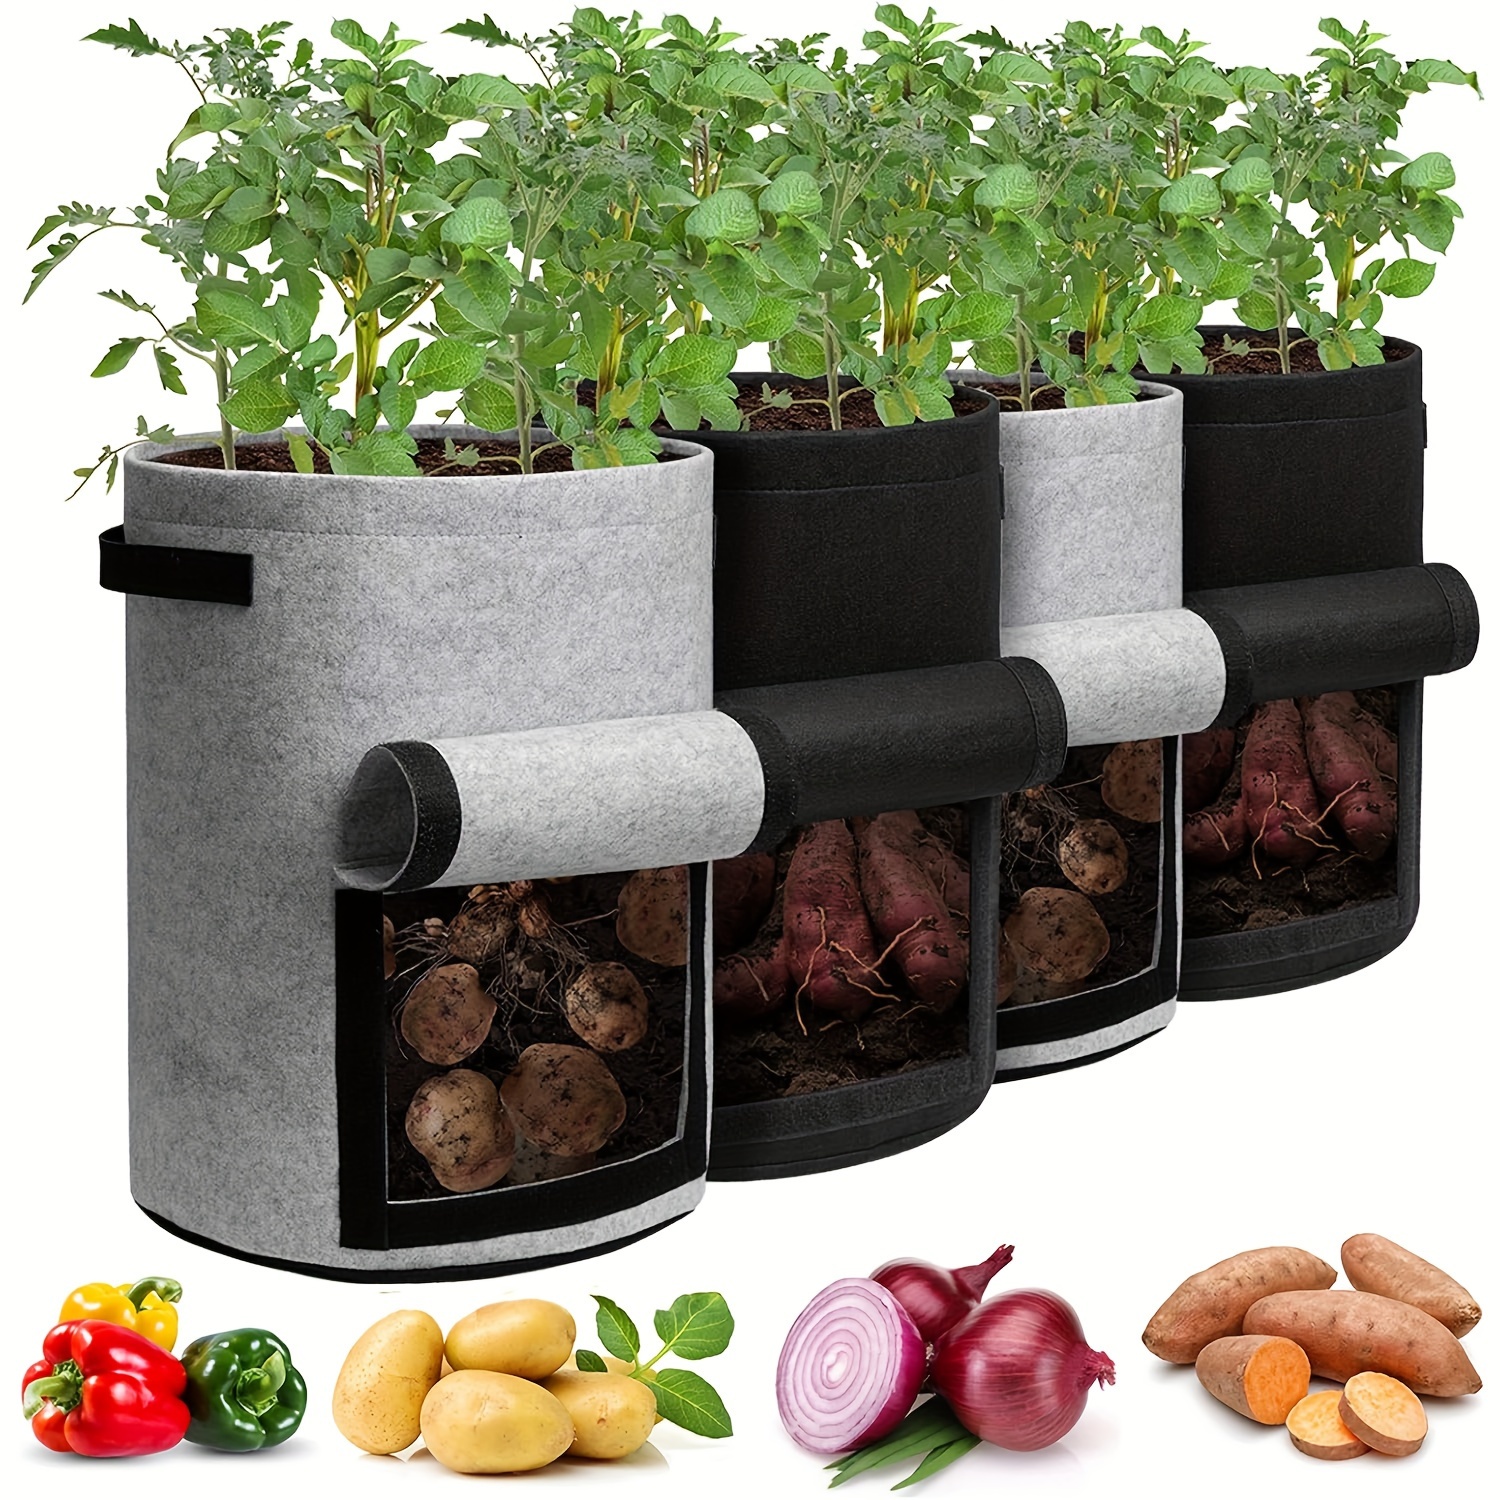 

4 Pack 10 Gallon Potato Grow Bags With Flap, Planter Pot With Handles And Harvest Window Garden Planting Bag Plant Pots For Tomato, Vegetable And Fruits